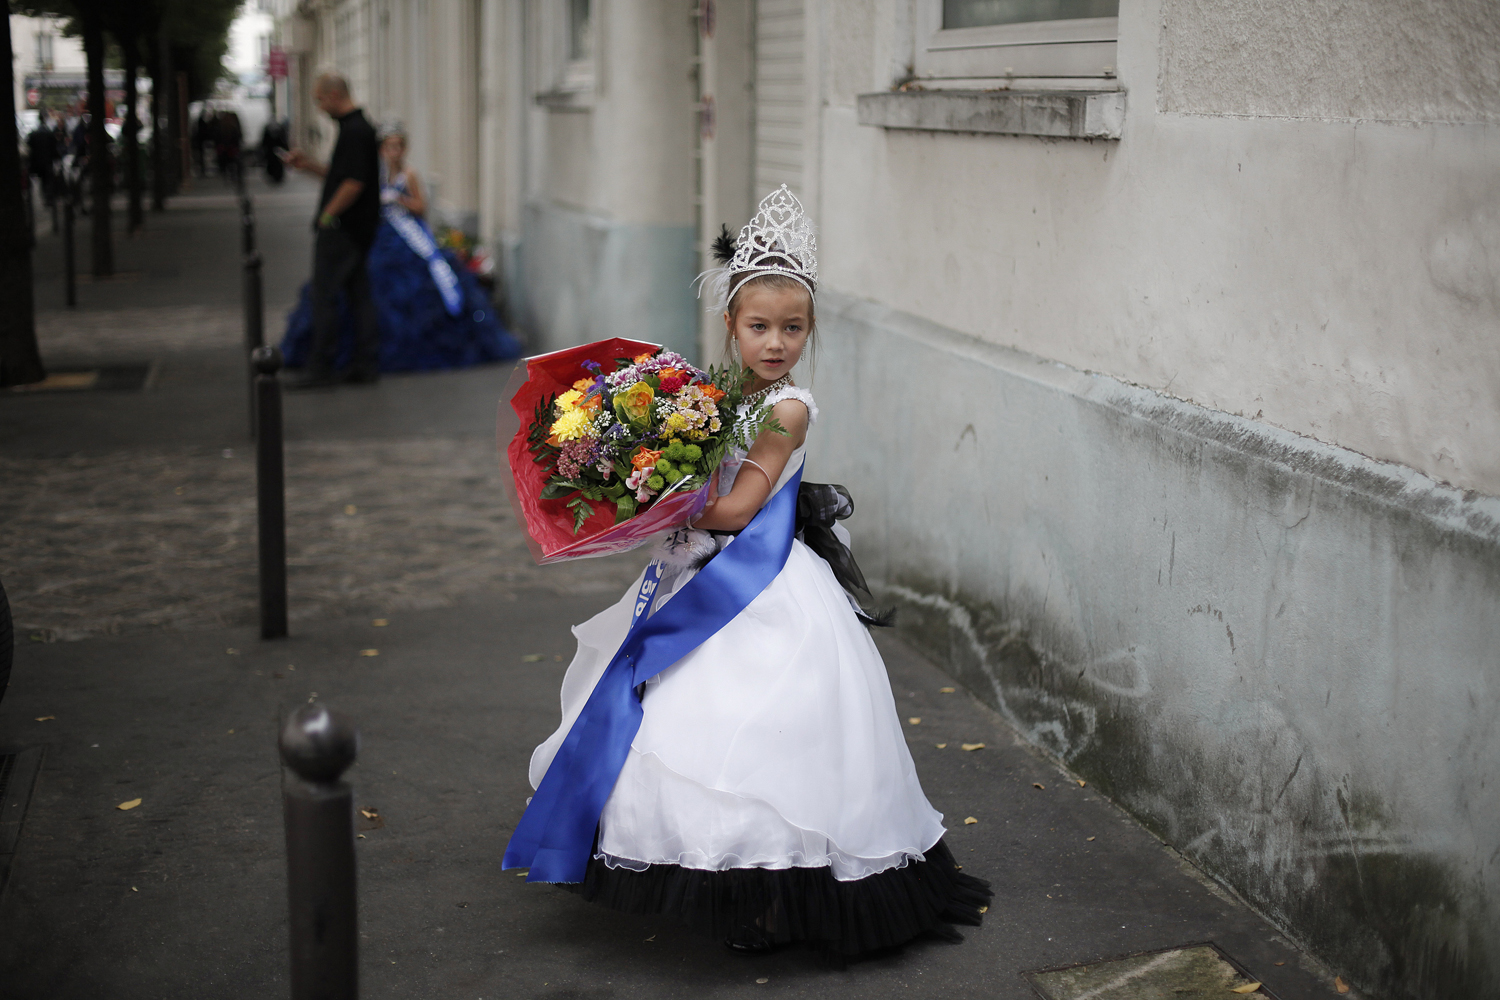 Sept. 28, 2013. Lou Hamrani, 6, walks in the street after attending the Mini Miss model beauty contest, in Paris.